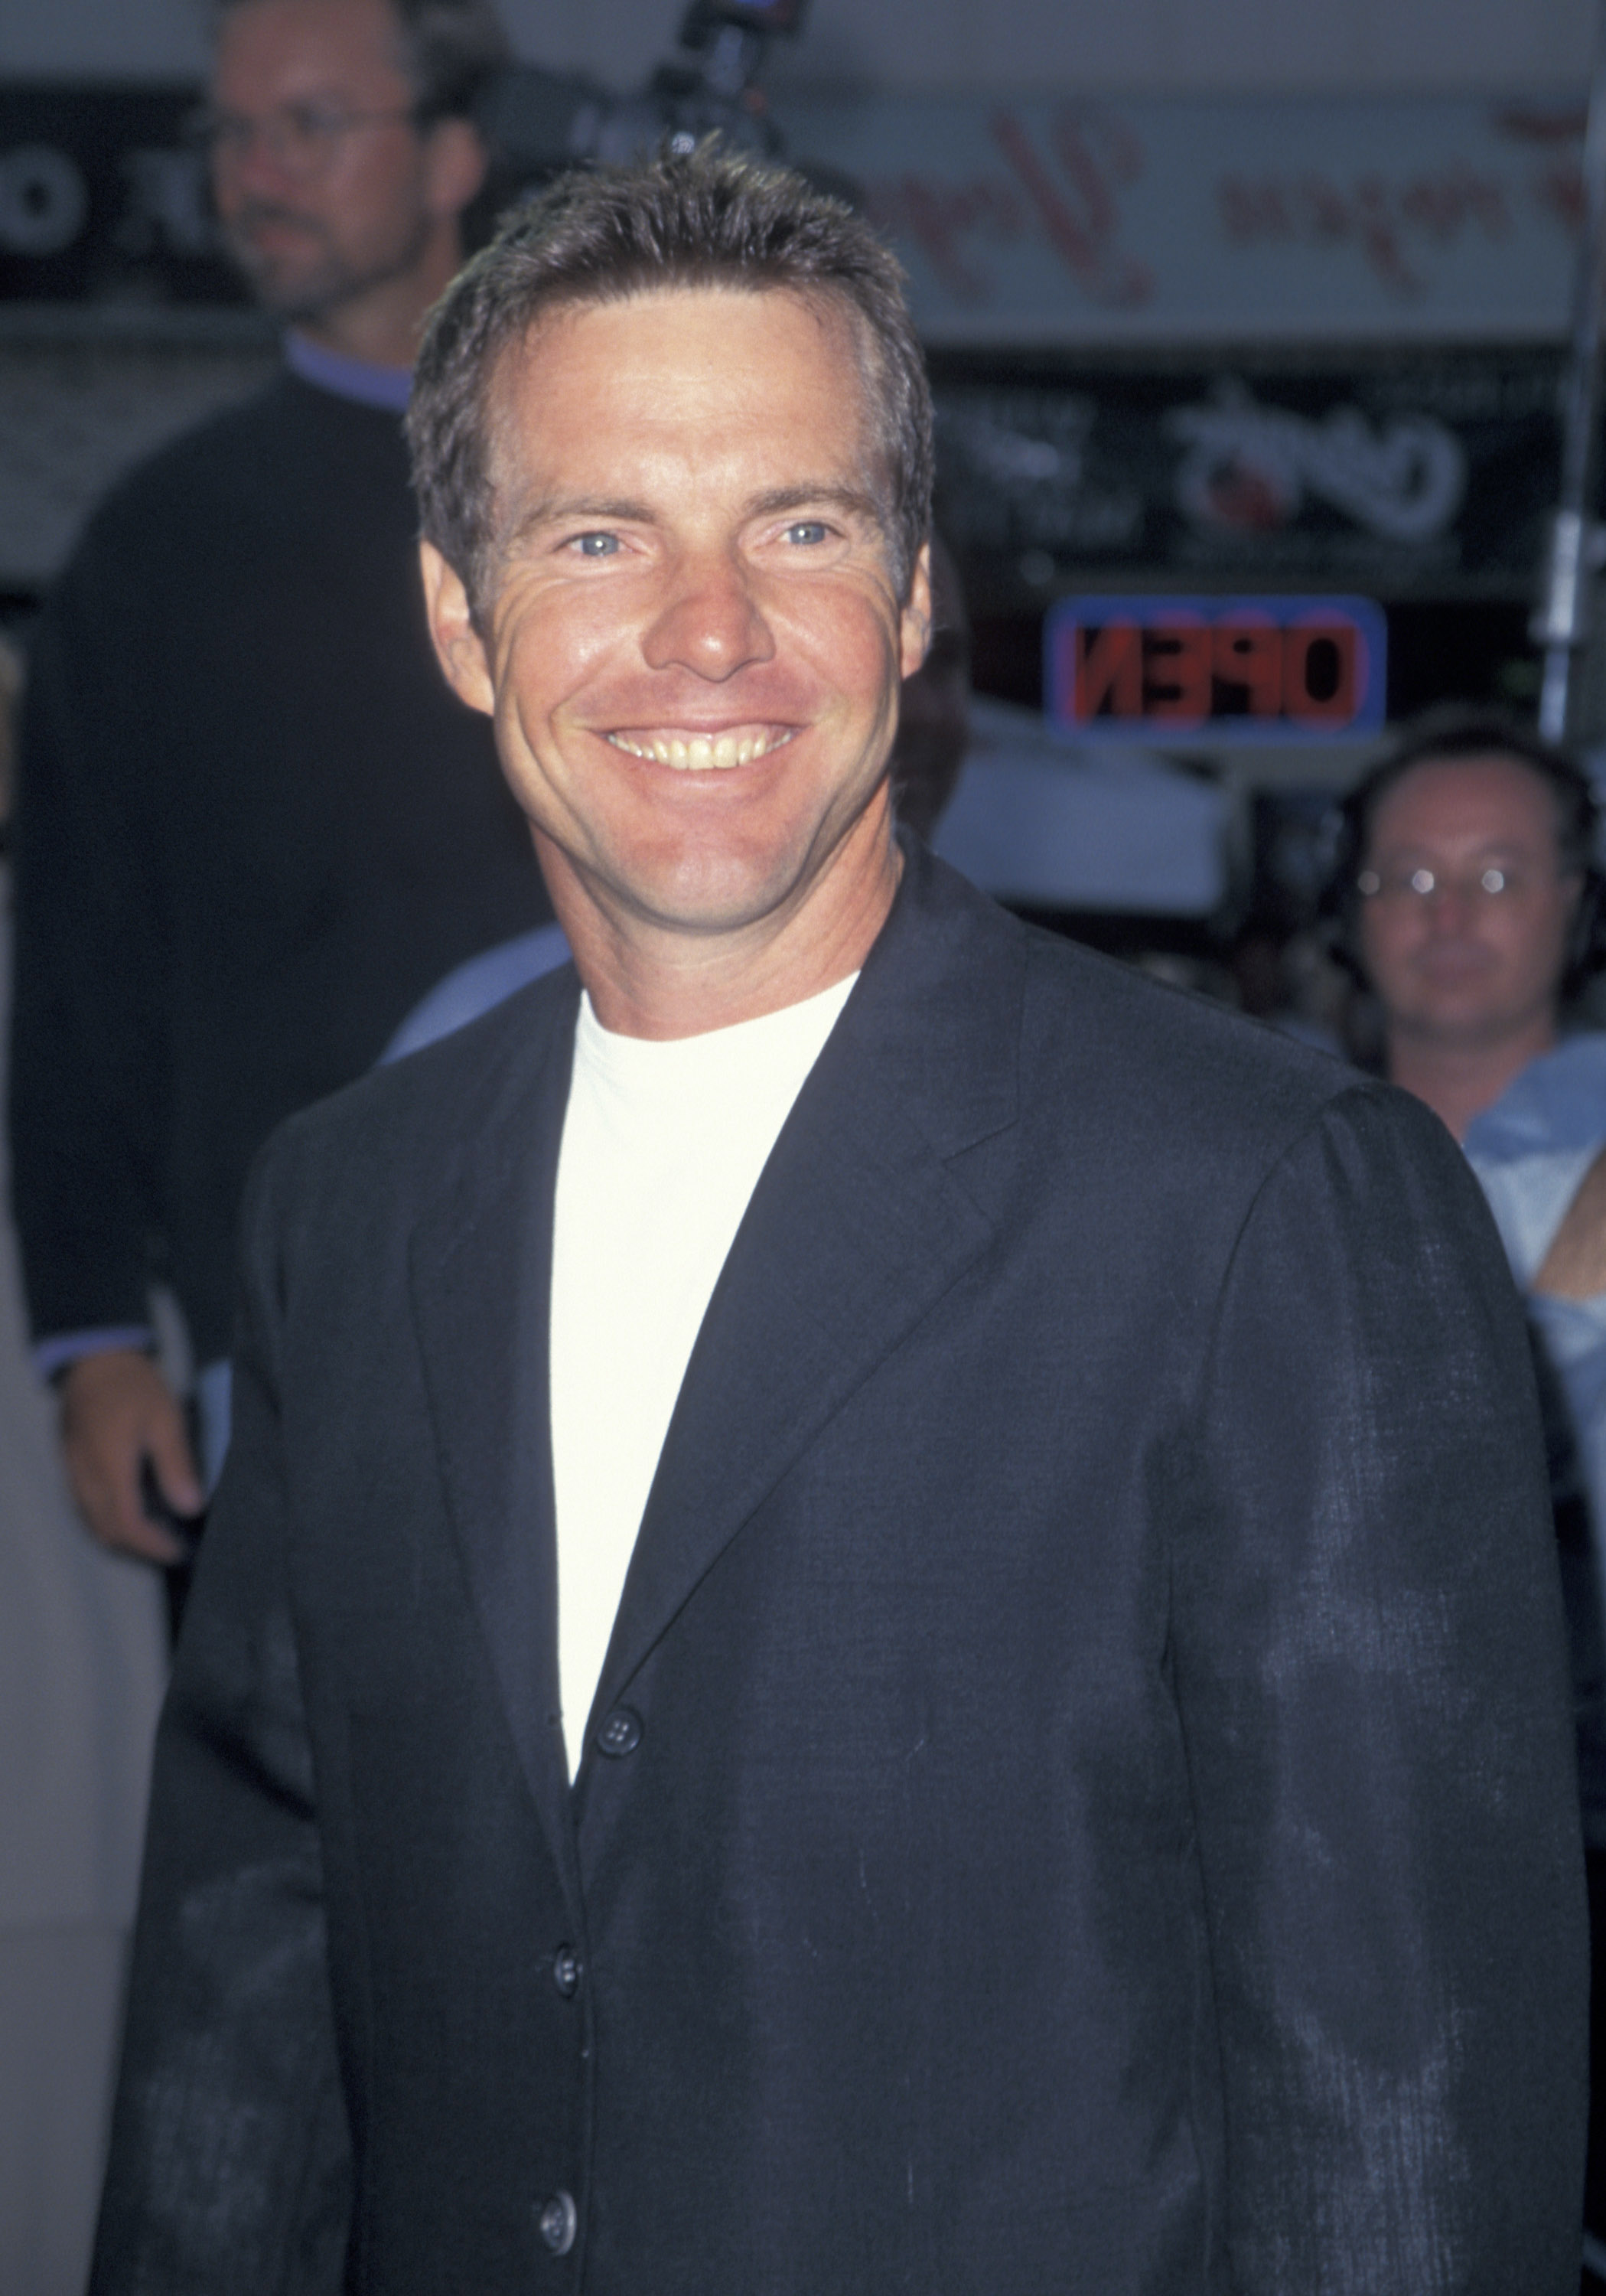 Dennis Quaid at the "Dragonheart" premiere in California, 1996 | Source: Getty Images